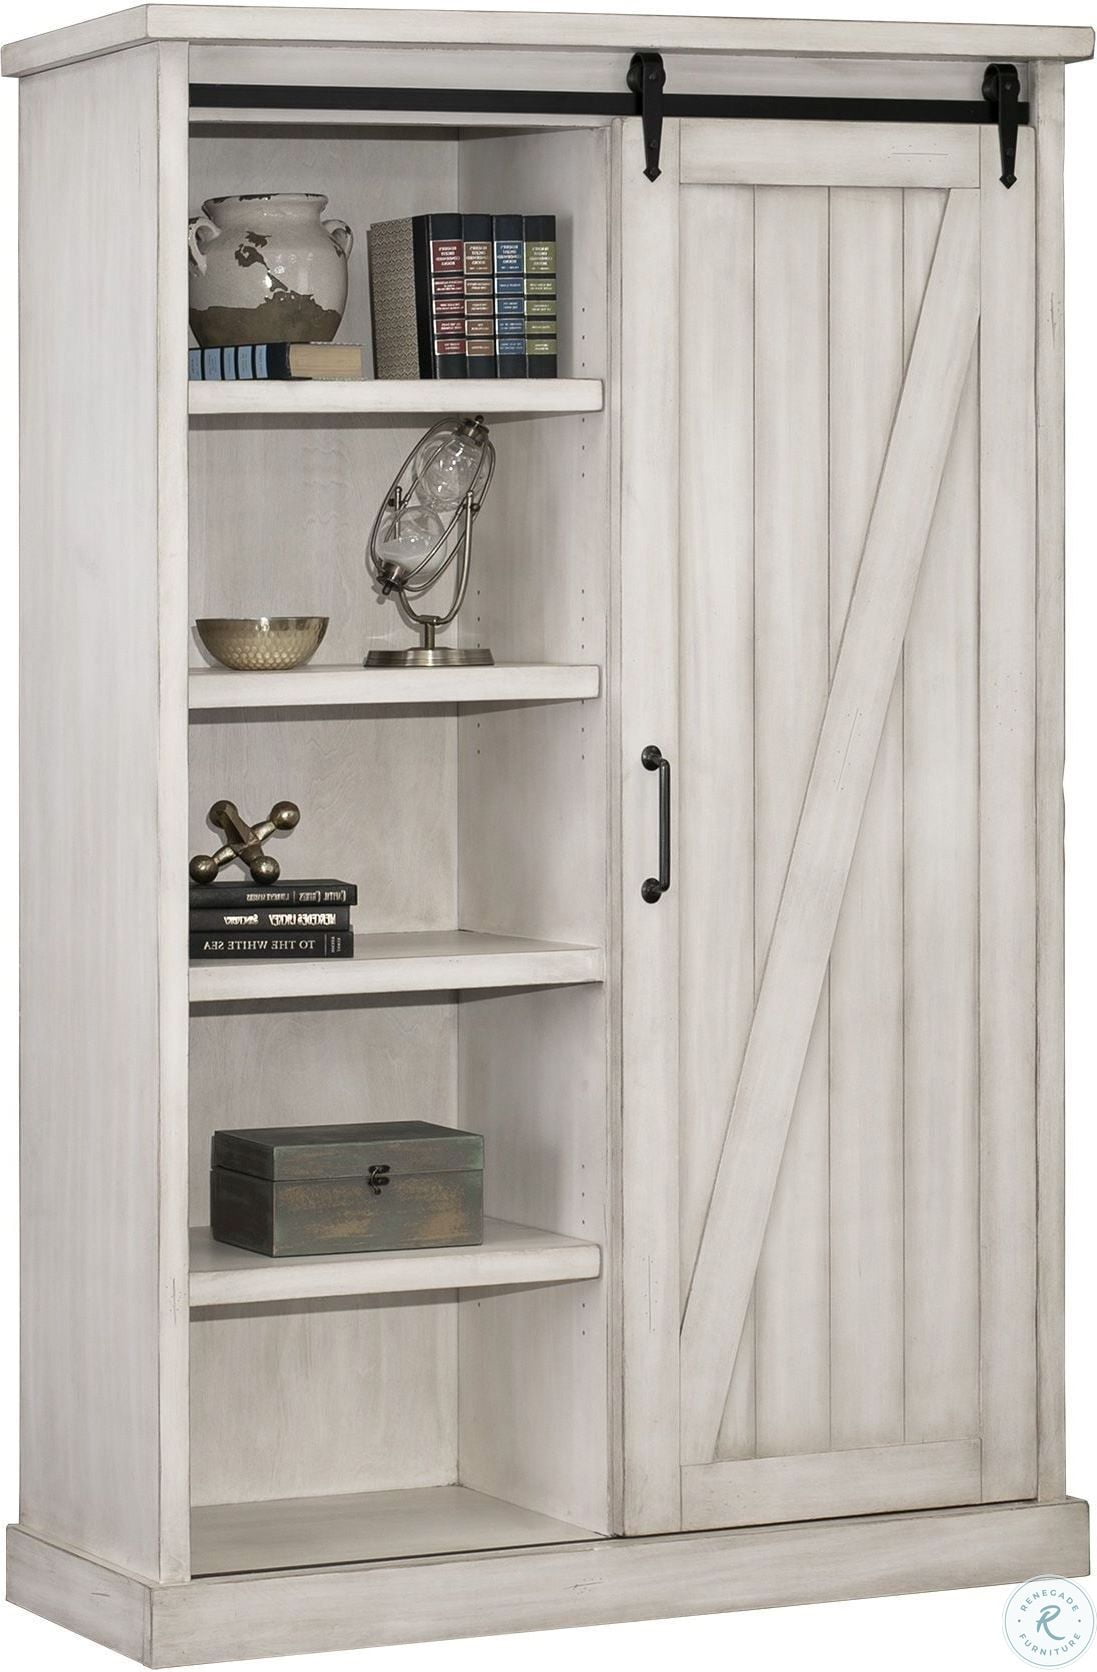 Avondale White 1 Door Bookcase From, Avondale Home Office Bookcase